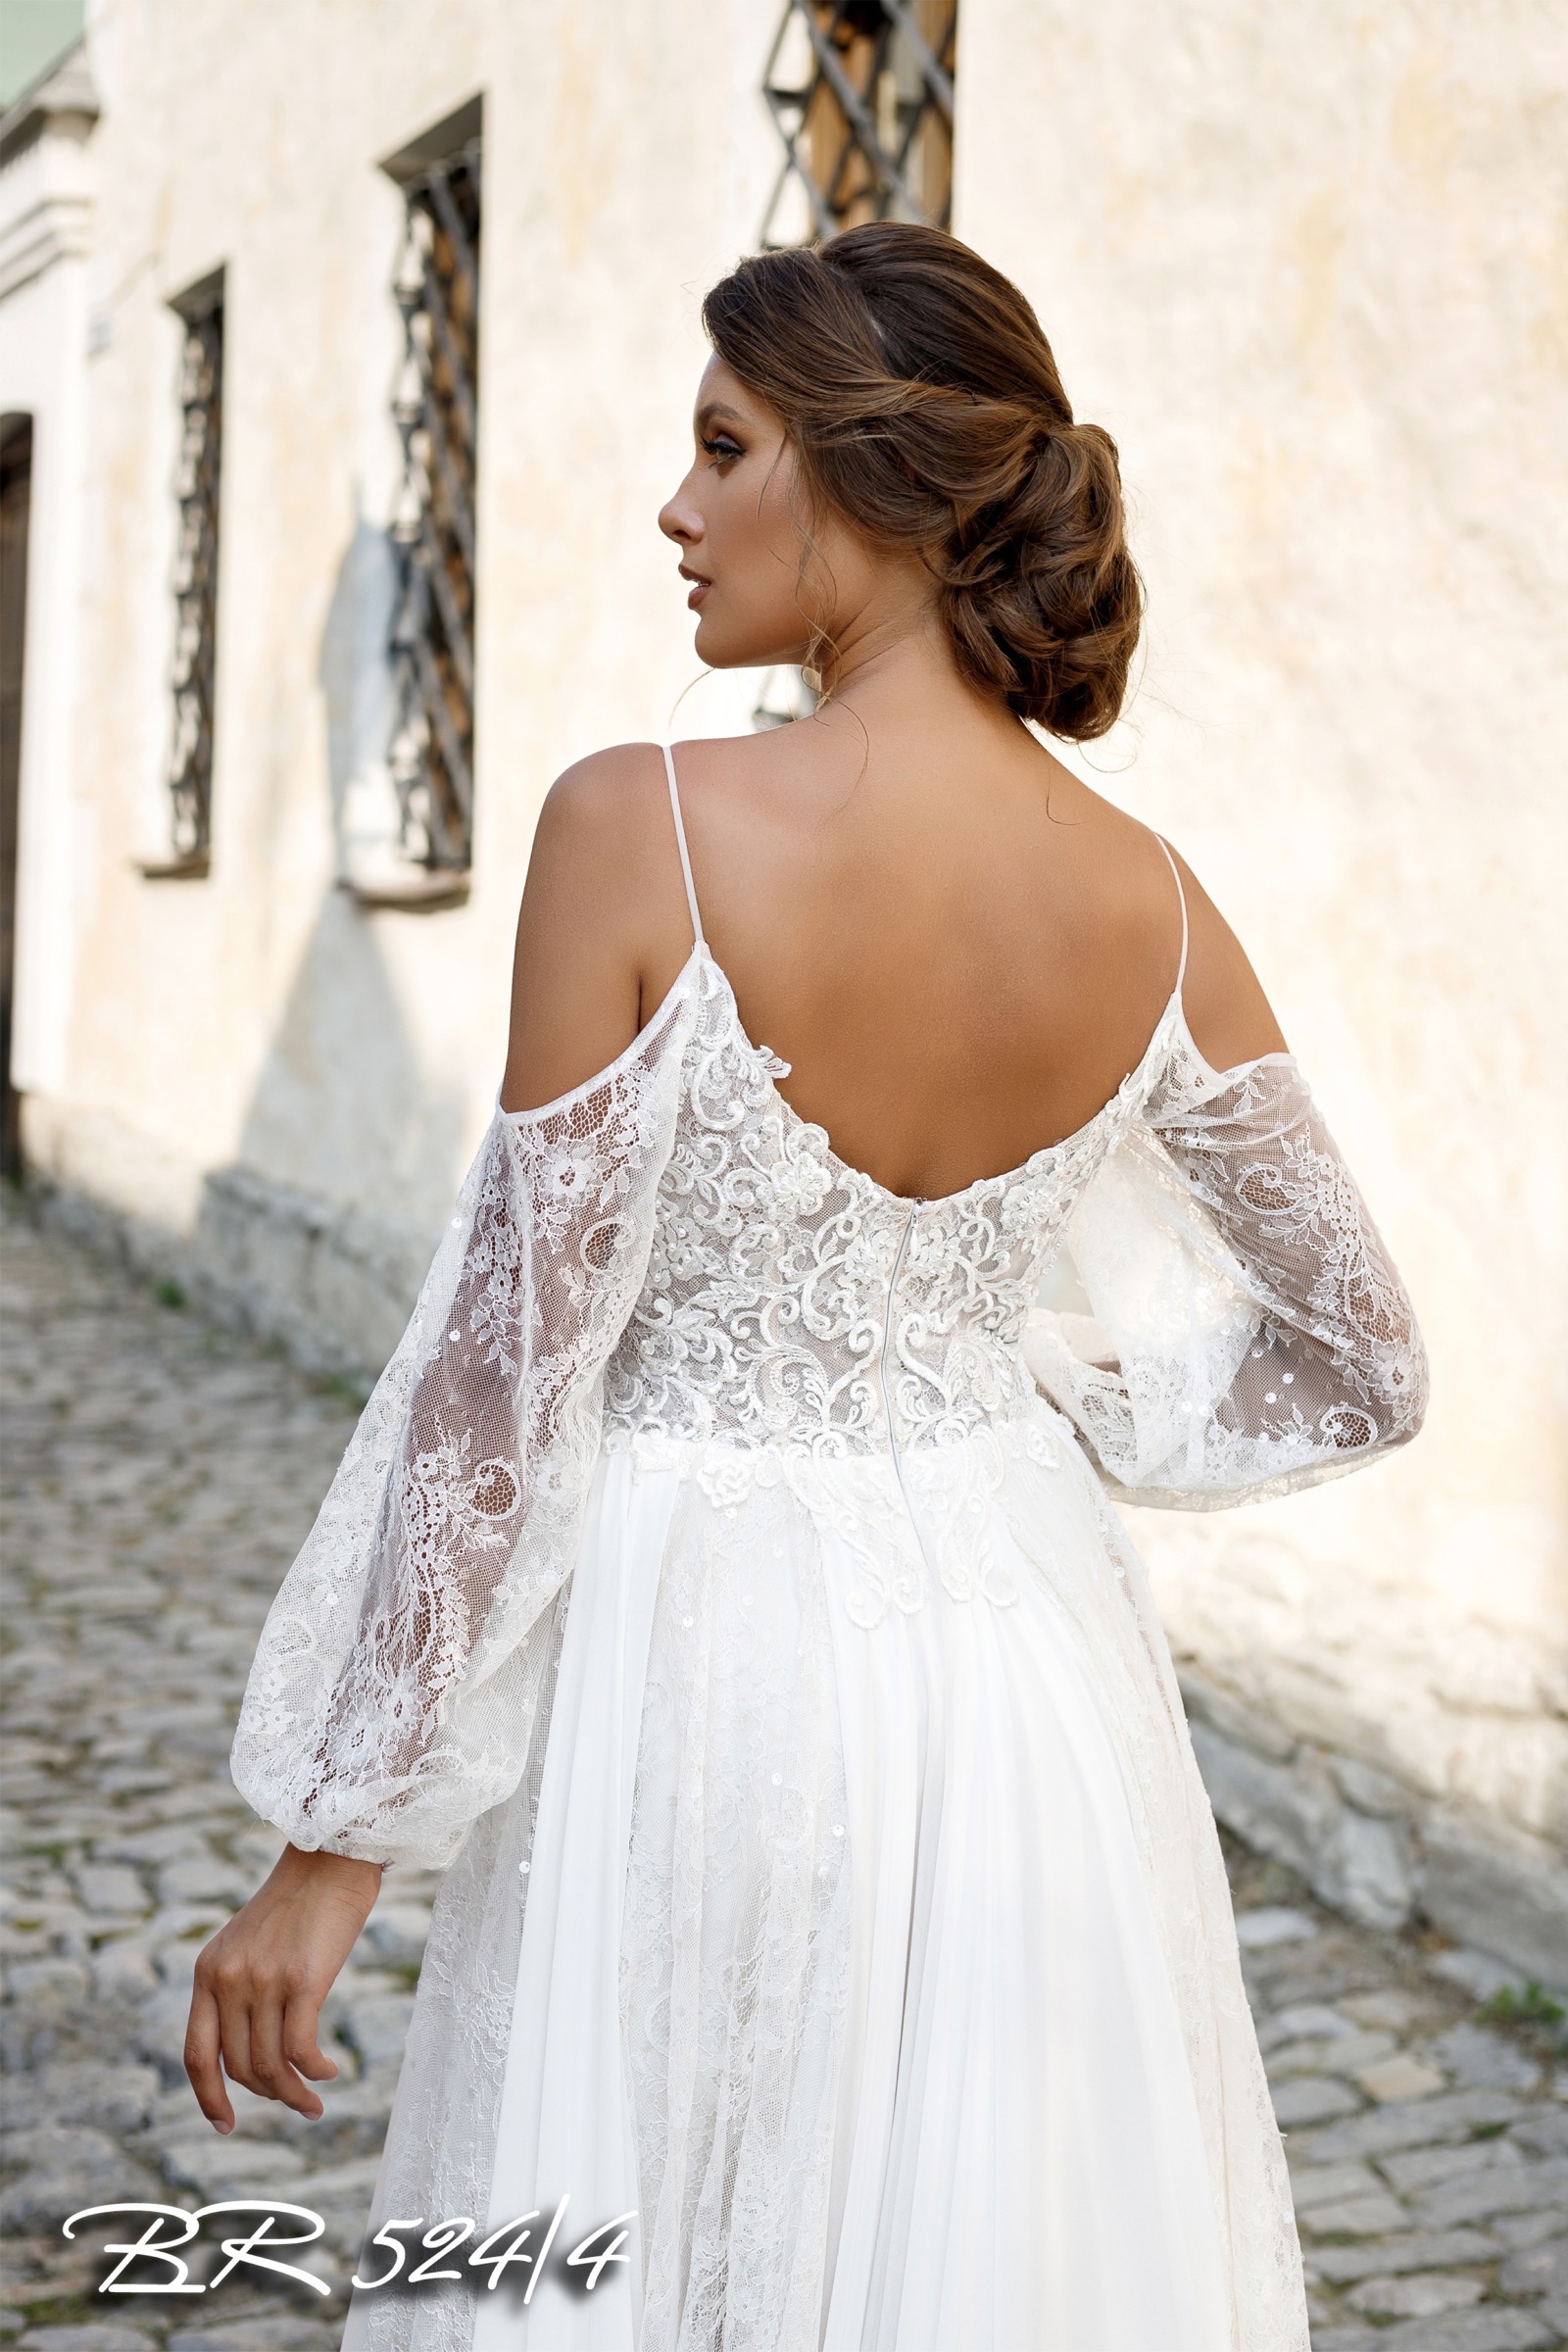 2020 wedding dress A-line v neckline butterfly dropped long sleeves spaghetti straps shimmer sequins embroidery lace